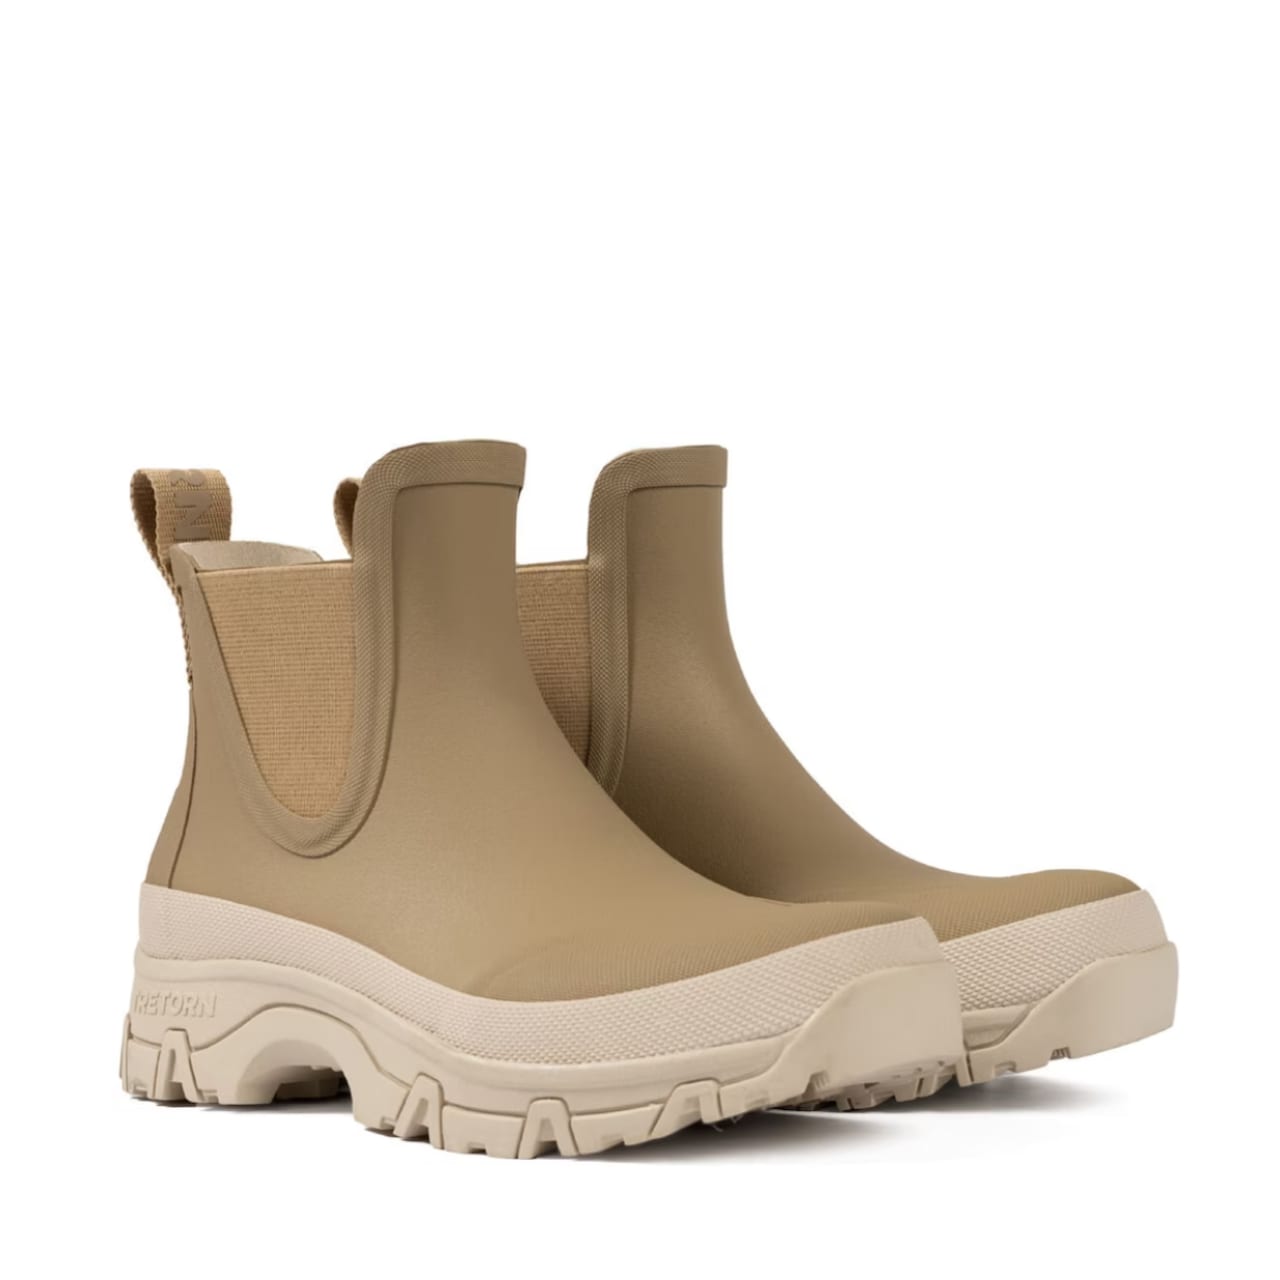 Garpa Rubber boot for men and women in the colour Incense